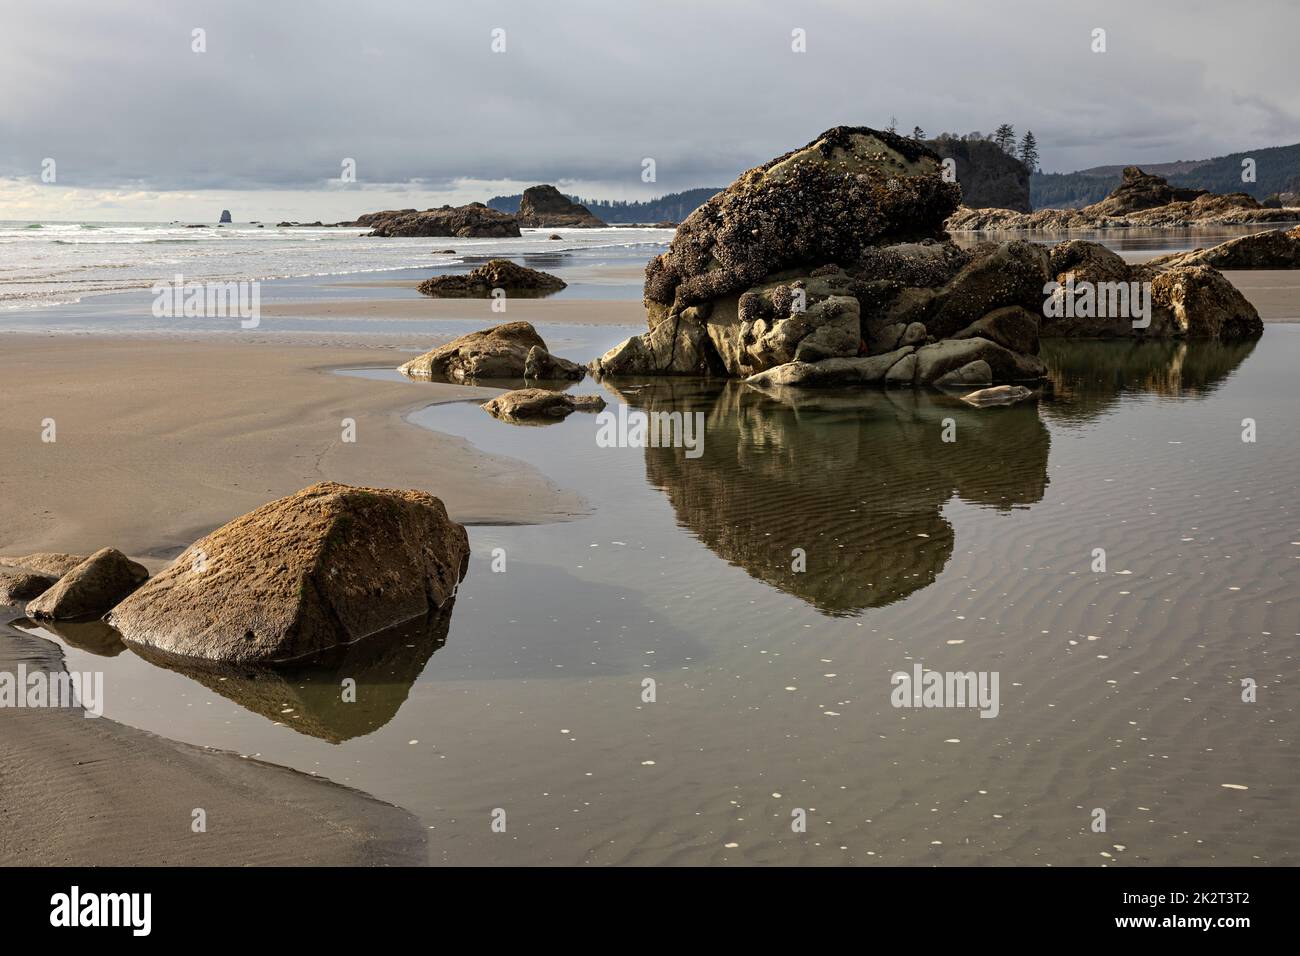 WA22045-00...WASHINGTON - Low tide at Ruby Beach on the Pacific Coast in the Olympic National Park. Stock Photo